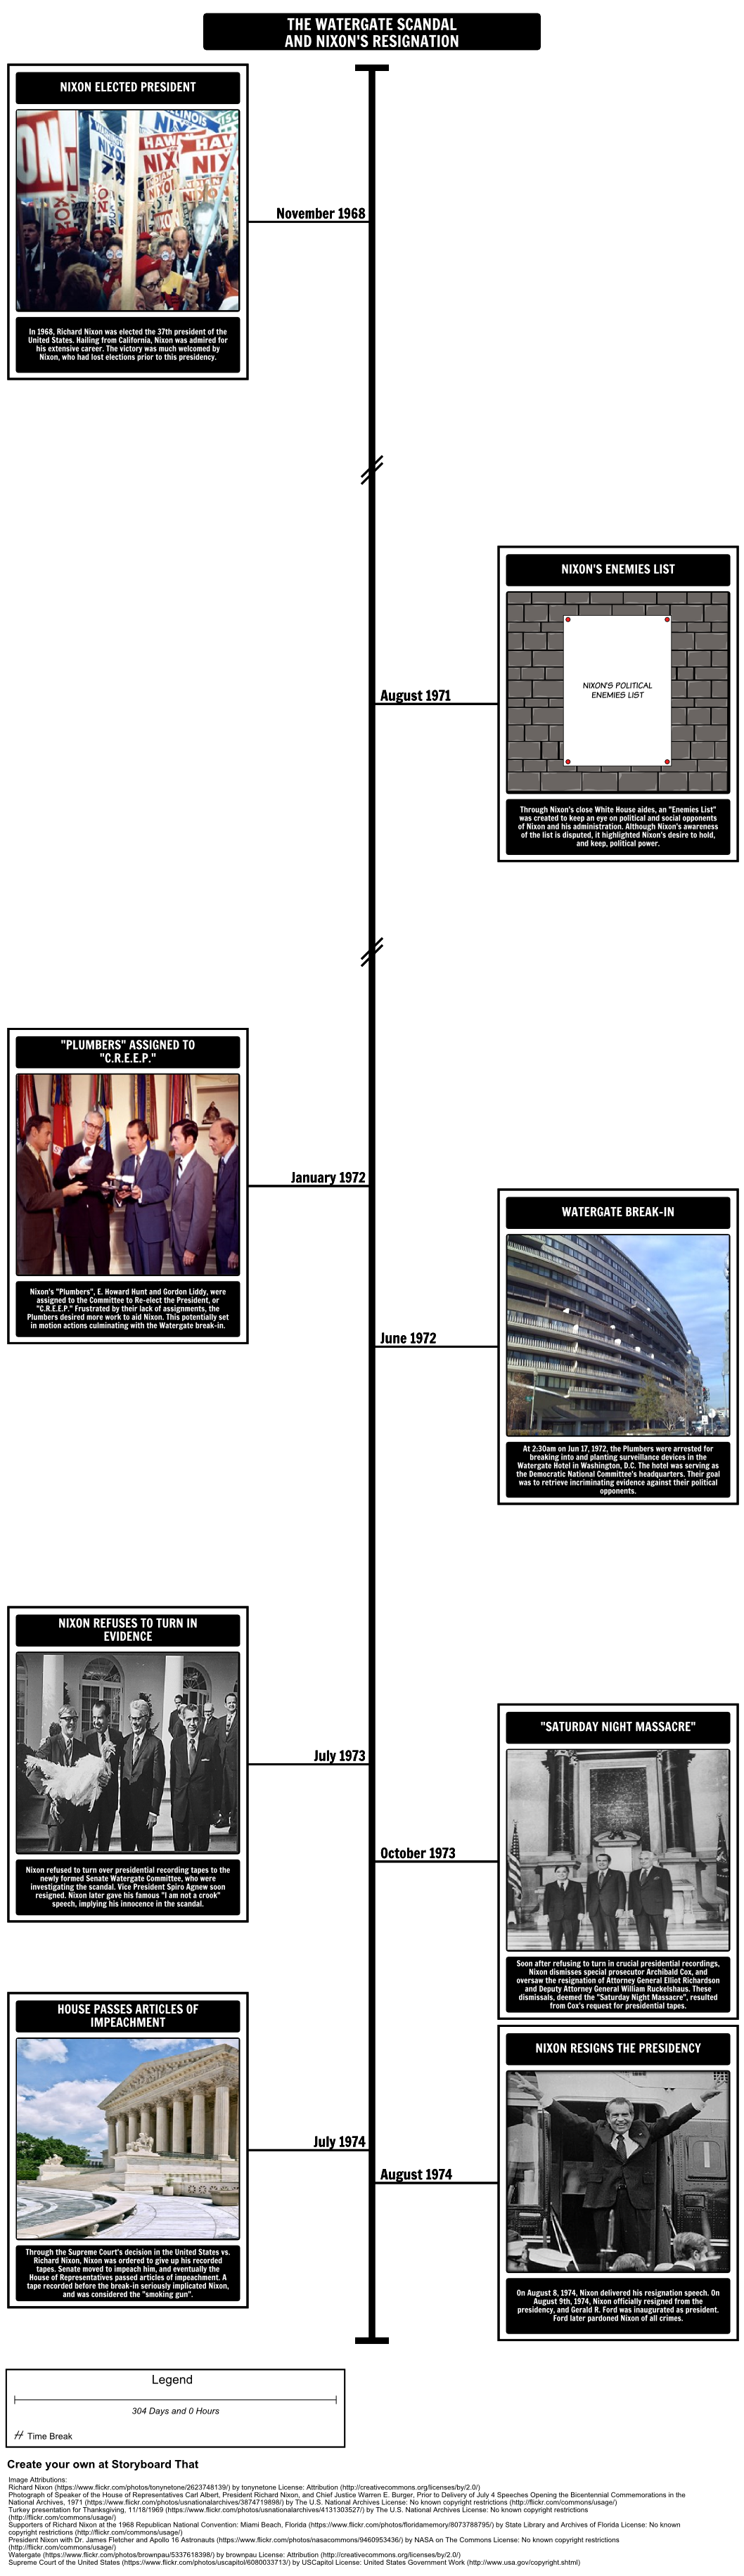 The Watergate Scandal Timeline and Nixon's Resignation